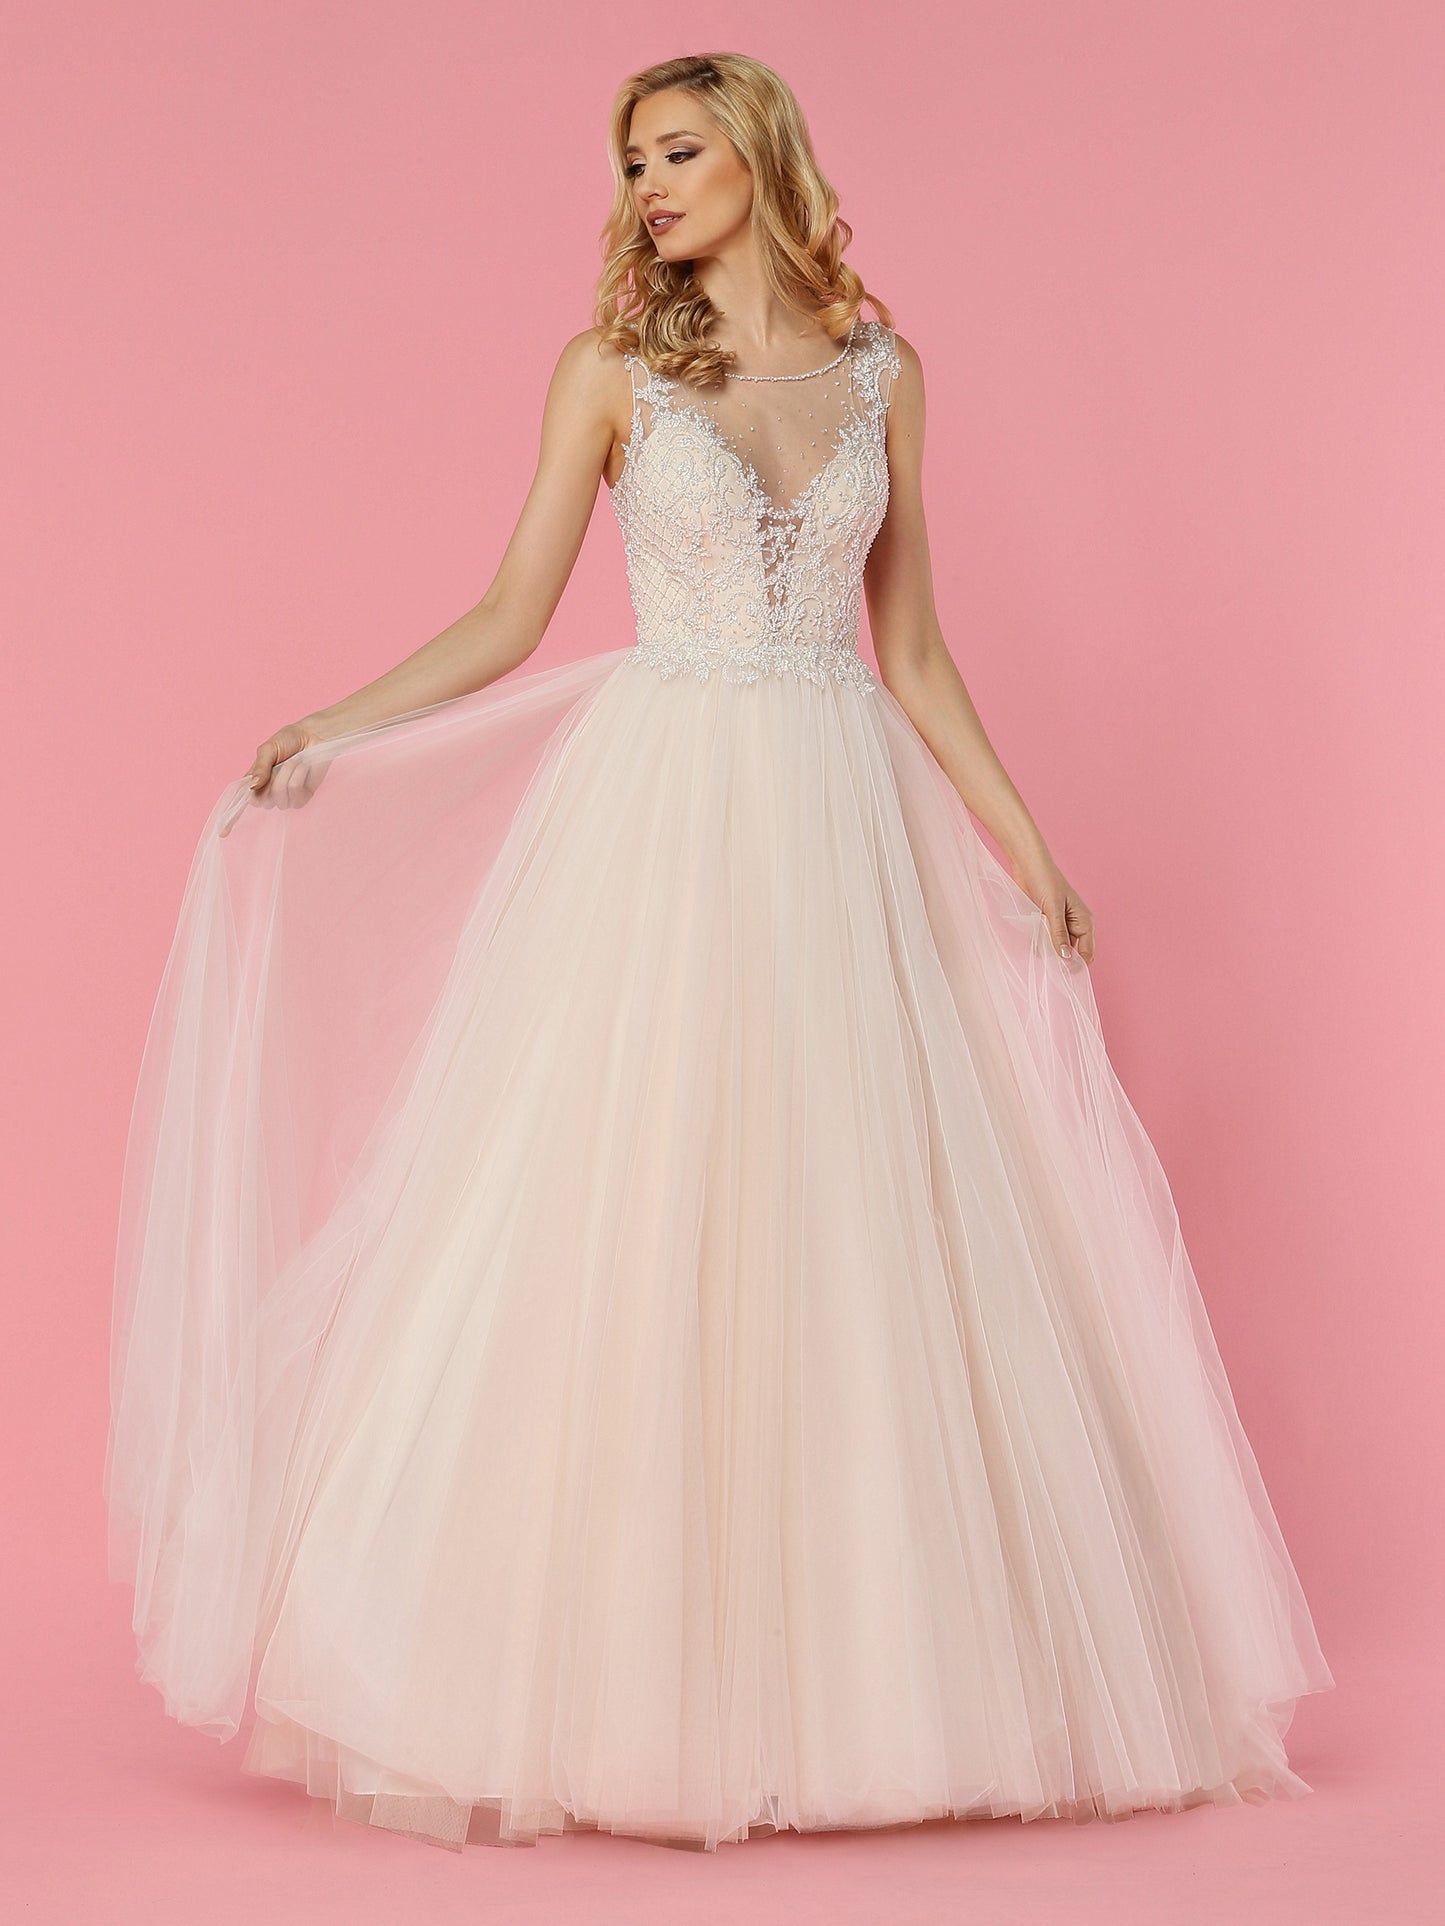 Davinci Bridal 50457 is a soft tulle ballgown wedding dress. Featuring a Crystal Embellished Bodice with a sheer mesh plunging neckline and sheer open back with Embellishments and buttons down the seam. Lace cascading from the bodice into the soft Lush Tulle skirt.  Available for 1-2 Week Delivery!!!  Available Sizes: 2,4,6,8,10,12,14,16,18,20  Available Colors: Ivory/Blush, Ivory/Ivory